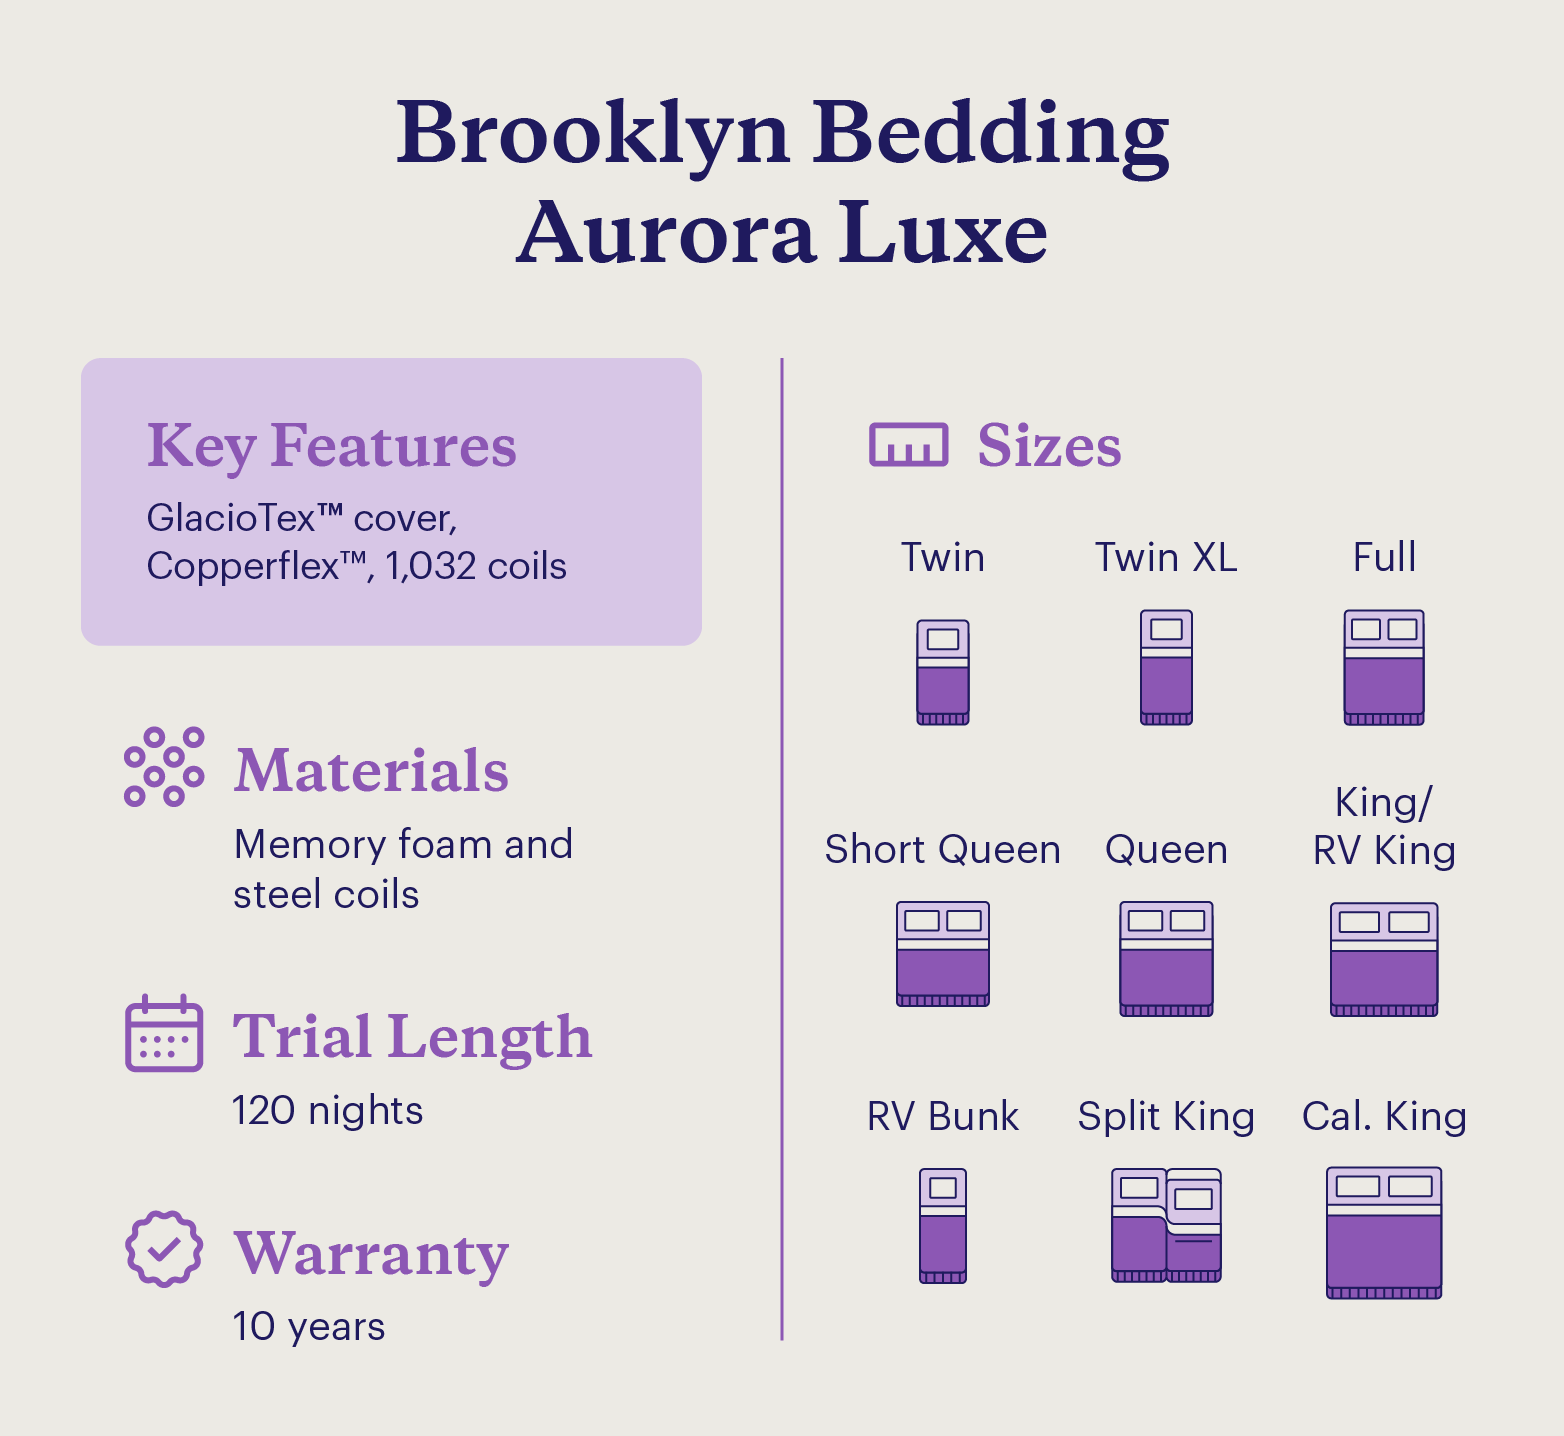 A graphic shows the key features and details of the Brooklyn Bedding Aurora Luxe bed.